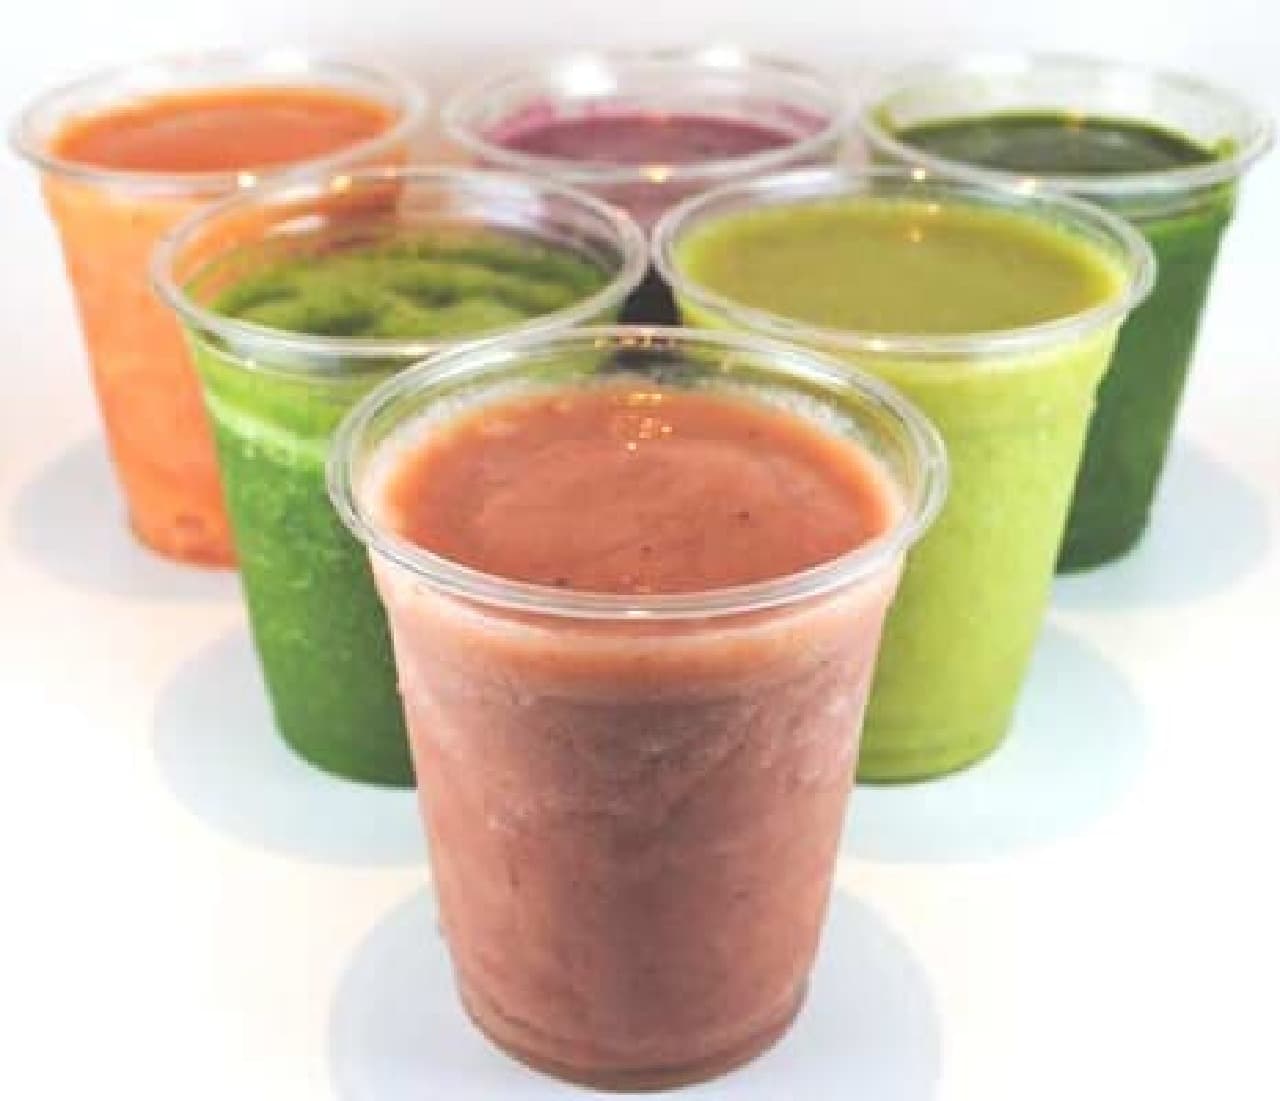 A wide variety of vegetable and fruit smoothies